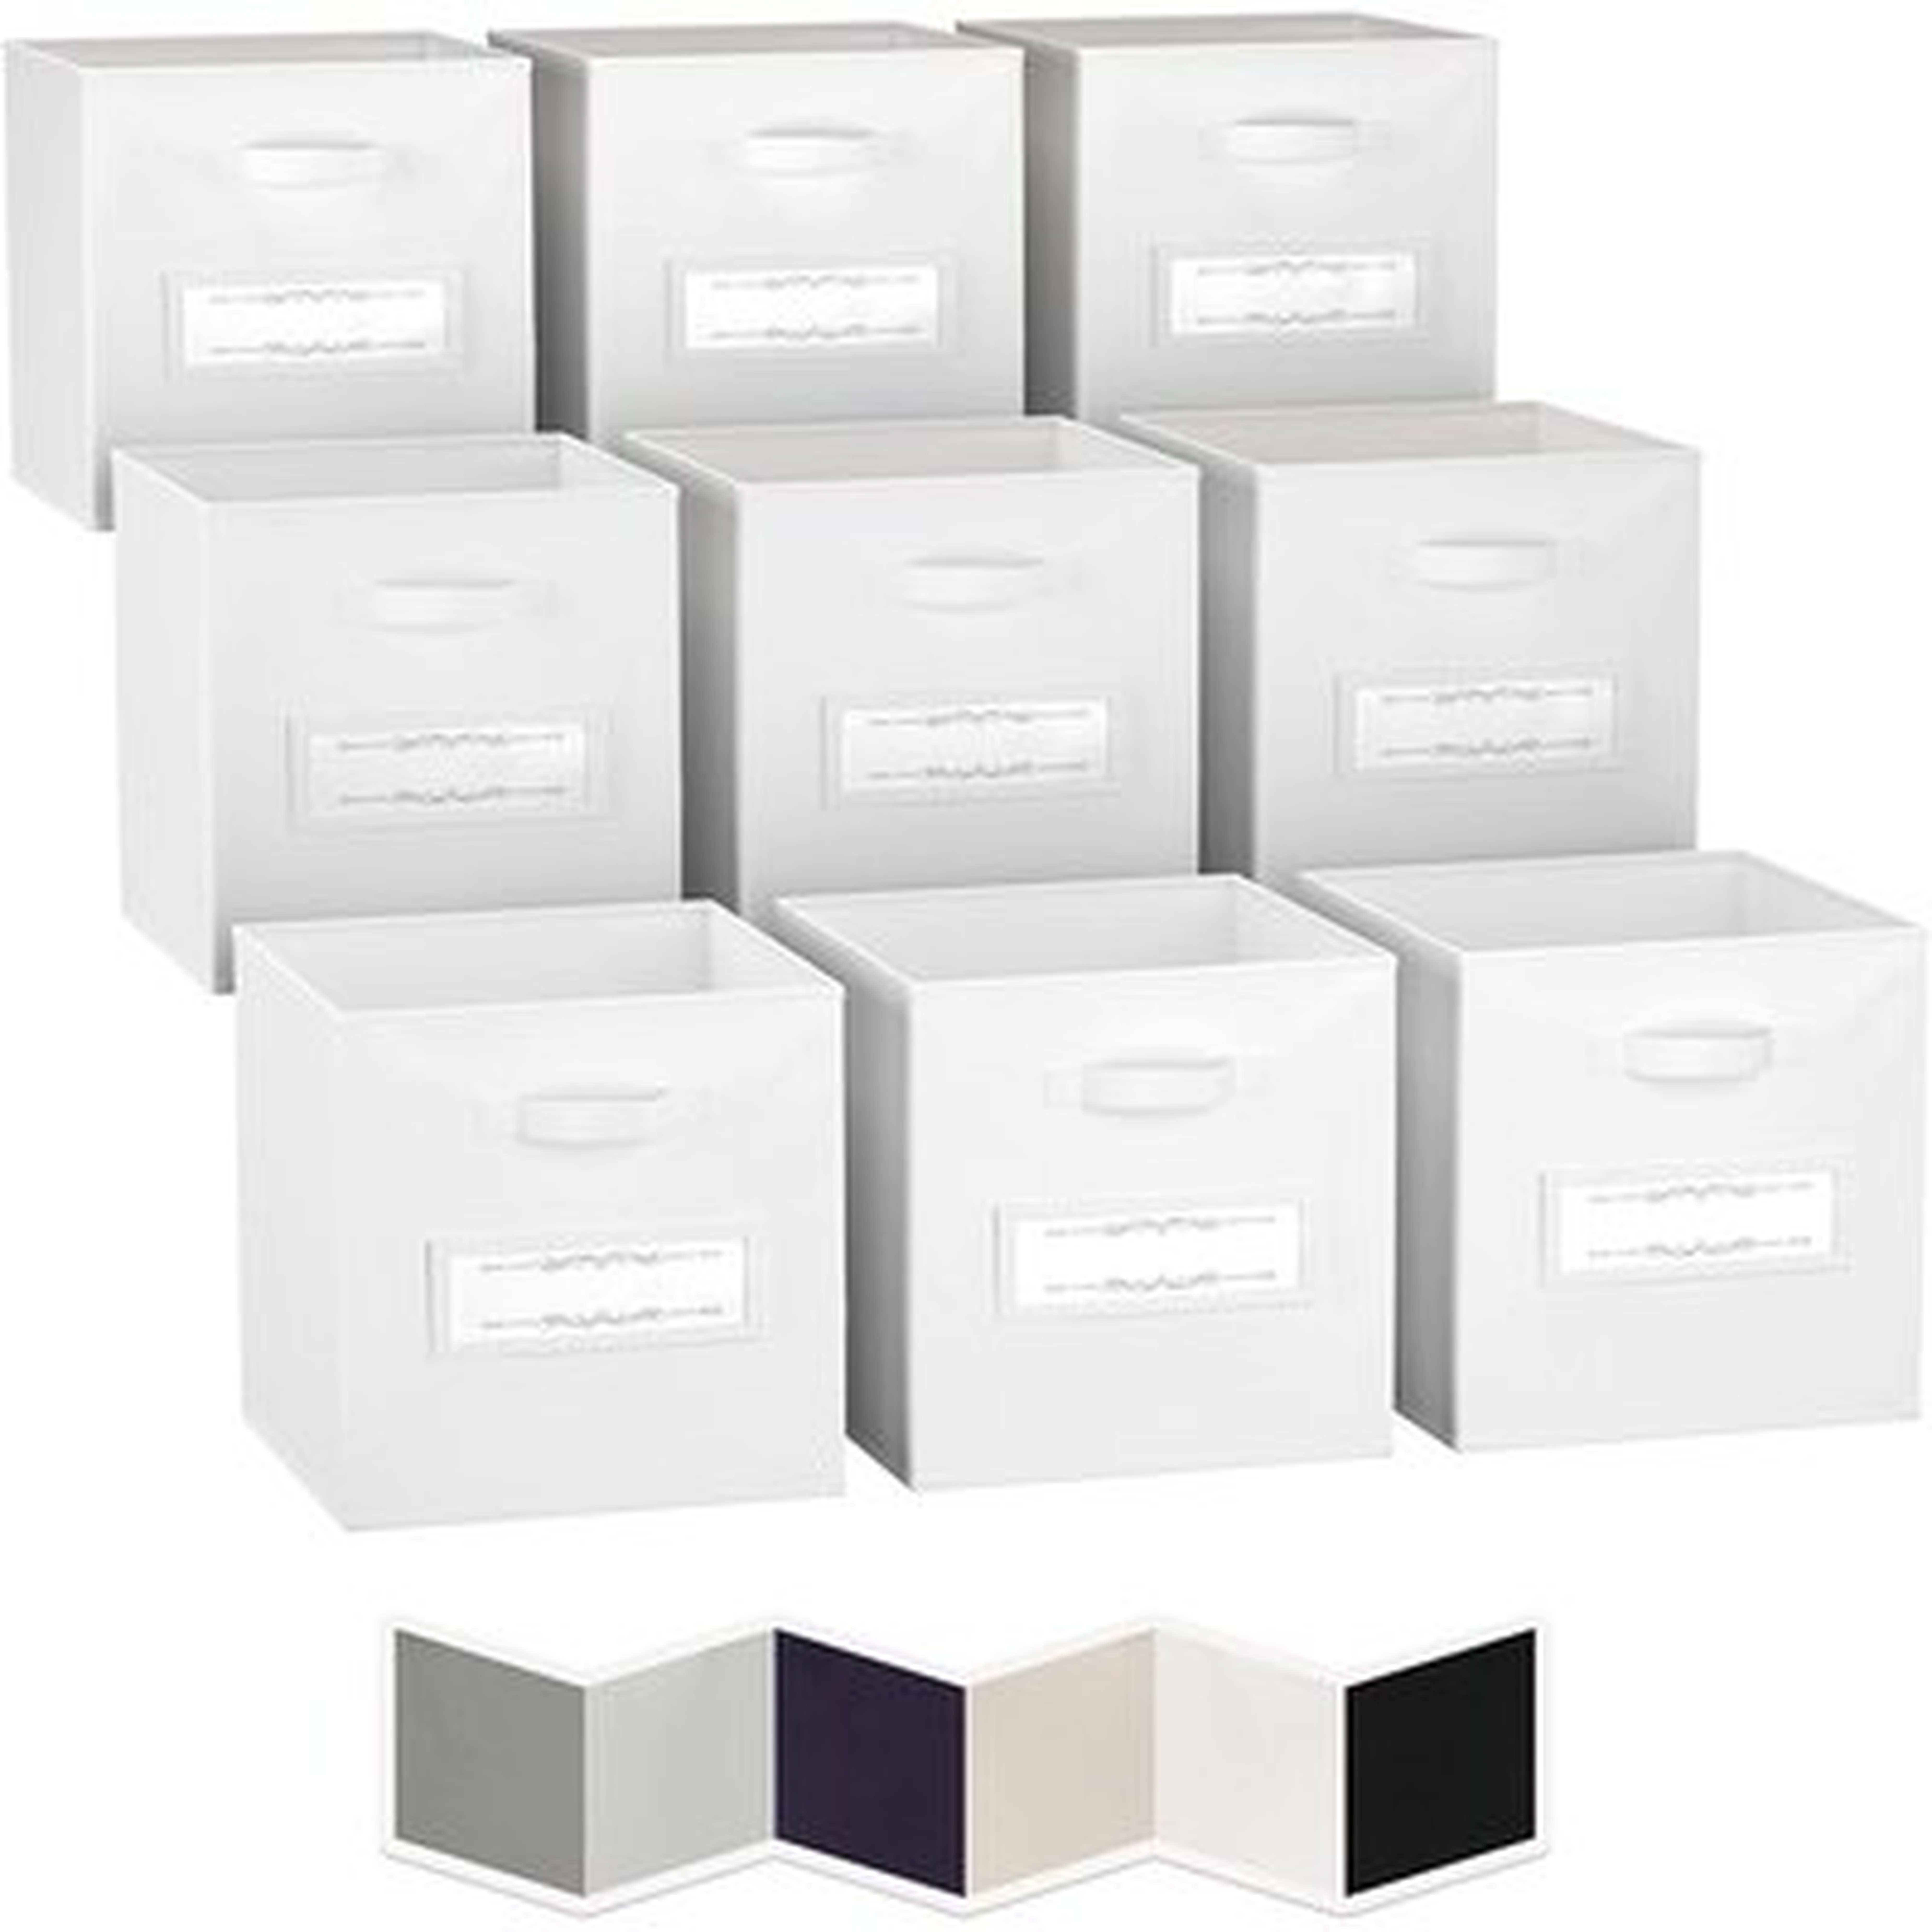 Storage Cubes (Set Of 9). Fabric Storage Bins With Label Window | Cube Storage Bins For Home And Office | Foldable Cube Baskets For Shelf | Closet Organizers And Storage Box - Wayfair